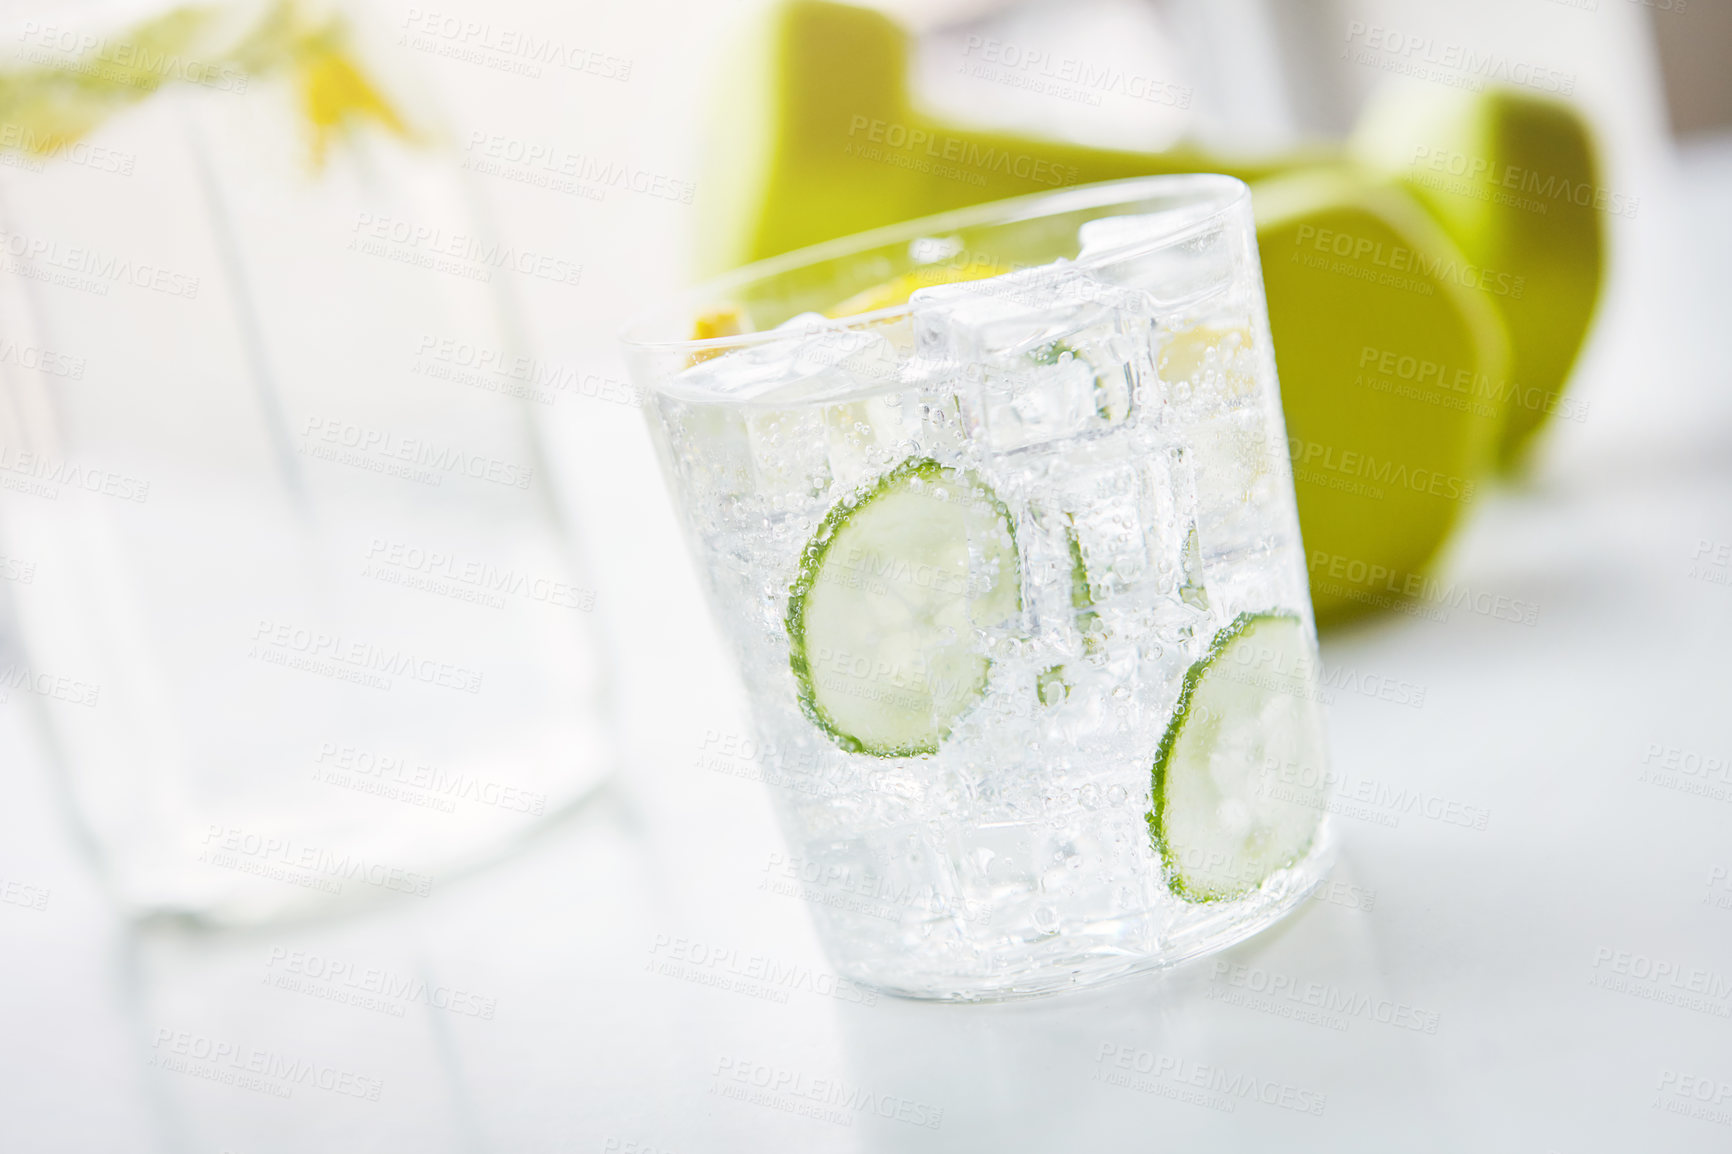 Buy stock photo Shot of a glass of water with slices of lemon and cucumber in